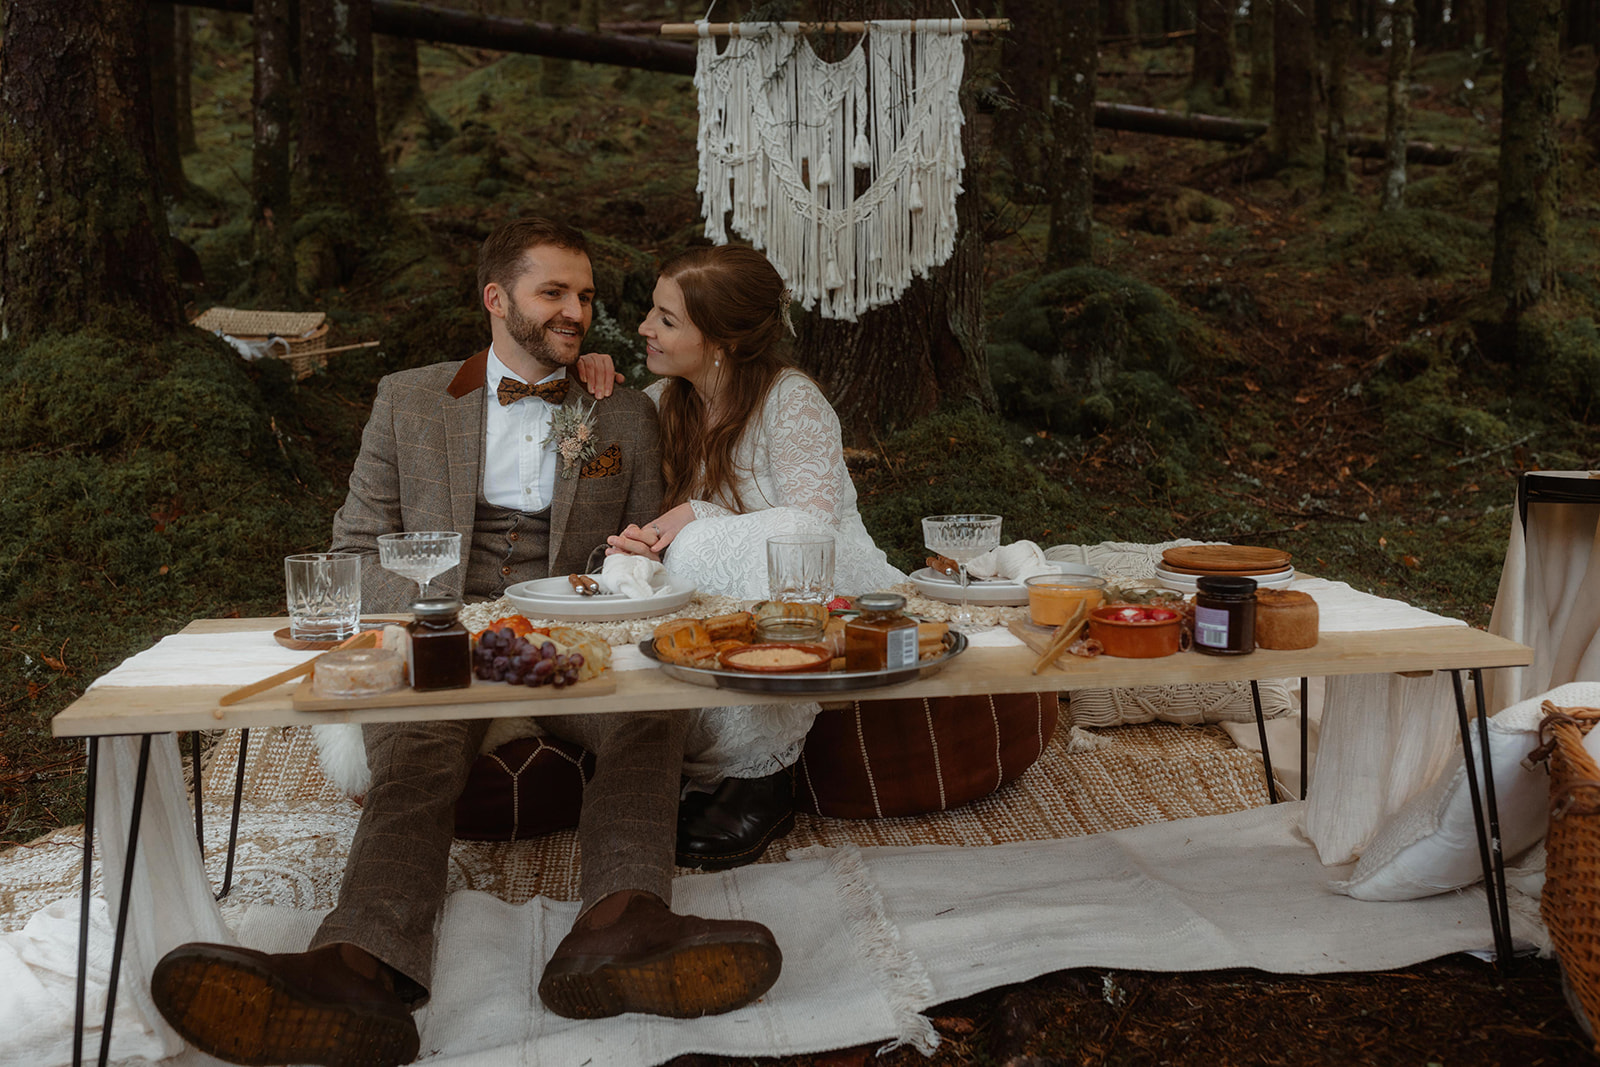 Holly and James had a picnic at the beautiful Glencoe Lochan after their elopement ceremony.